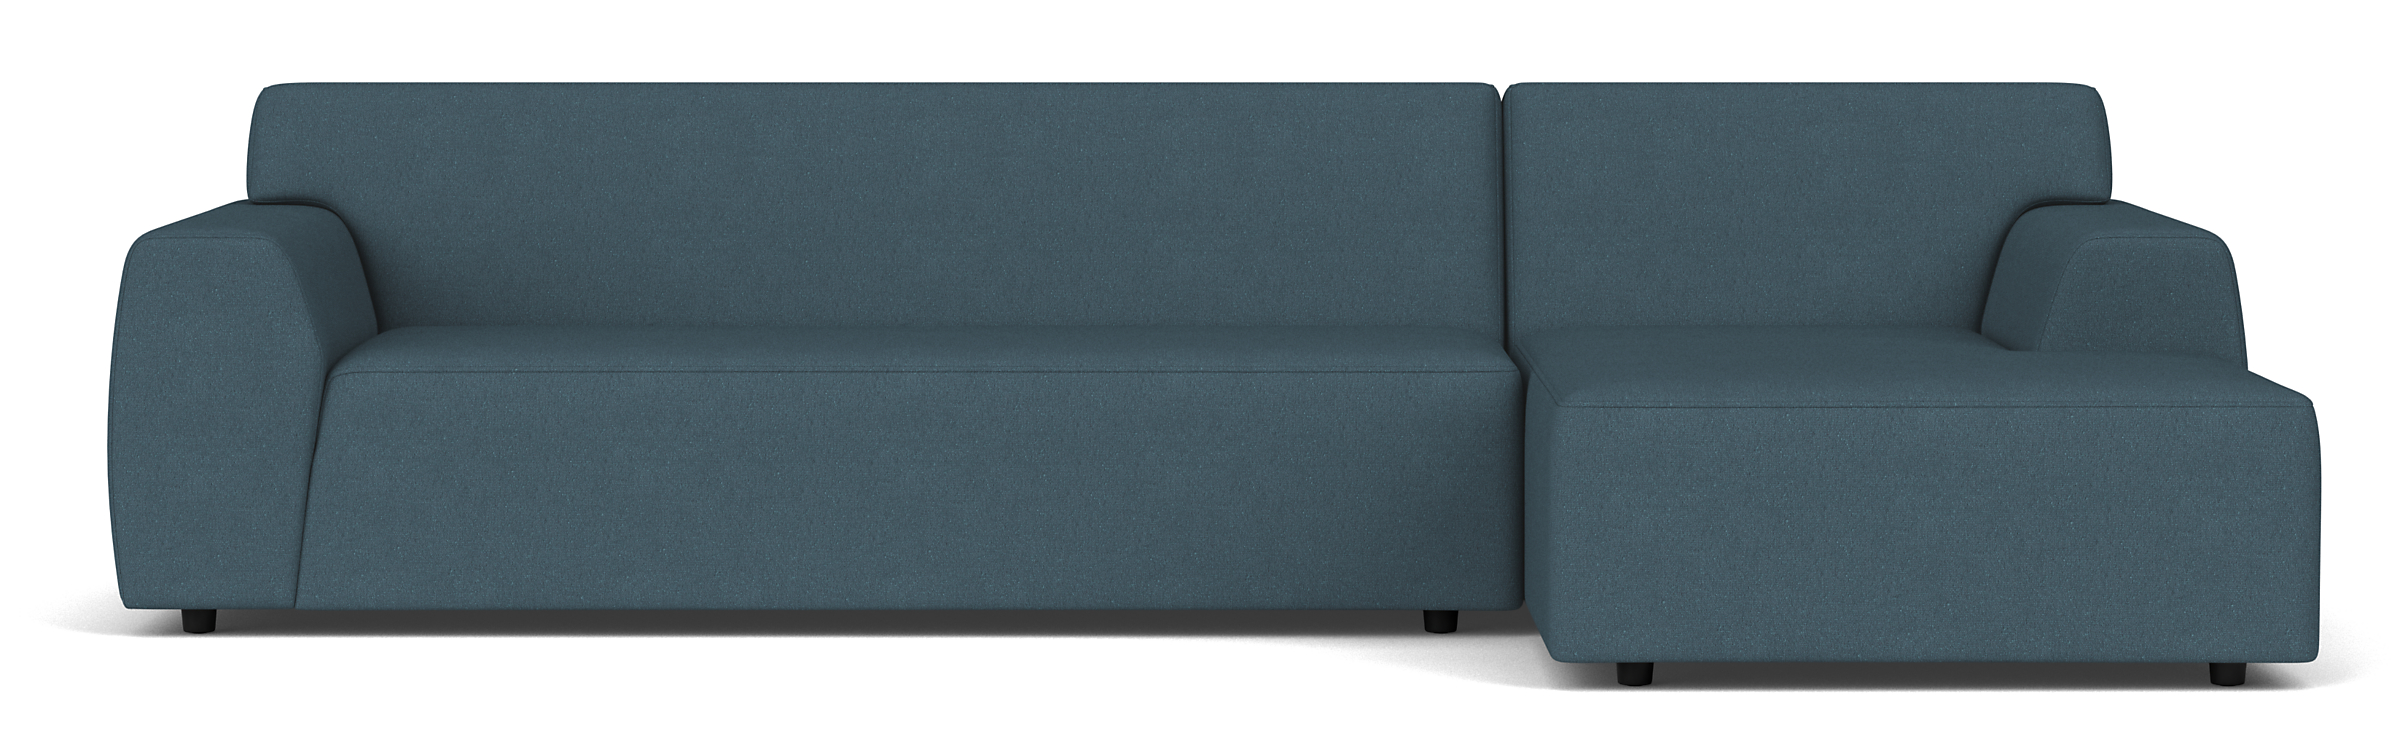 Linville 118" Sofa w/Right-Arm Chaise in Declan Ocean